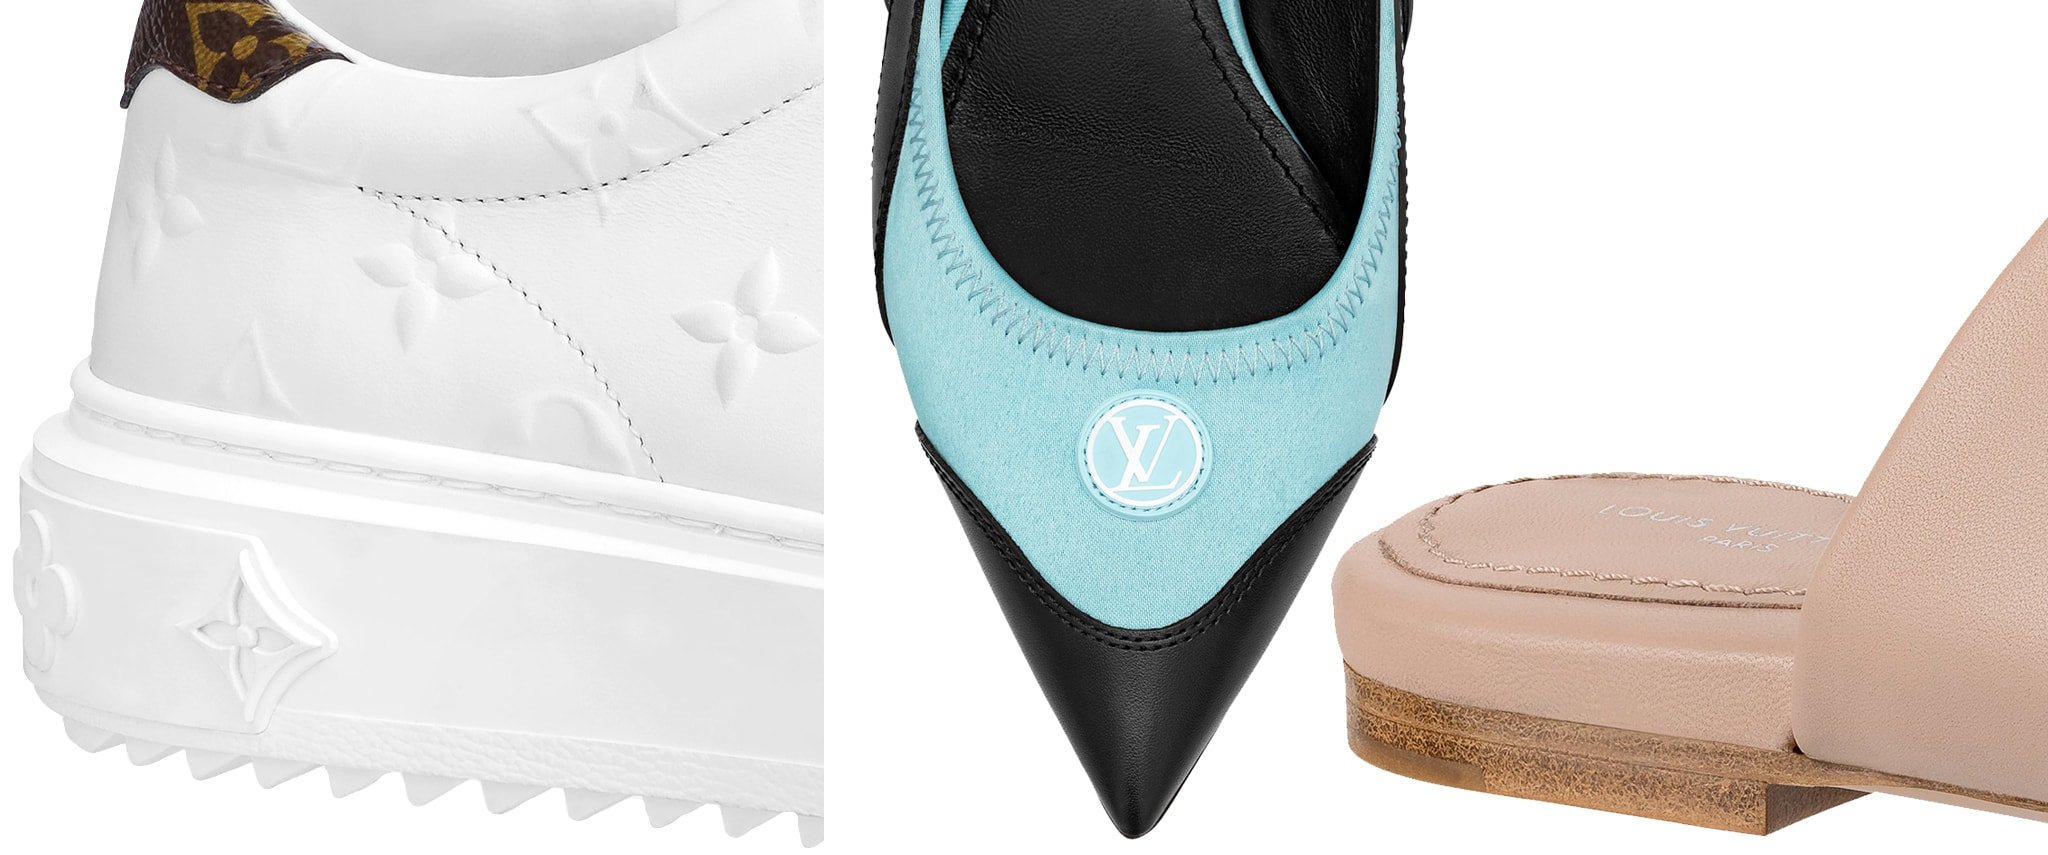 Authentic Louis Vuitton shoes should have clean, flawless stitching, not uneven or loose